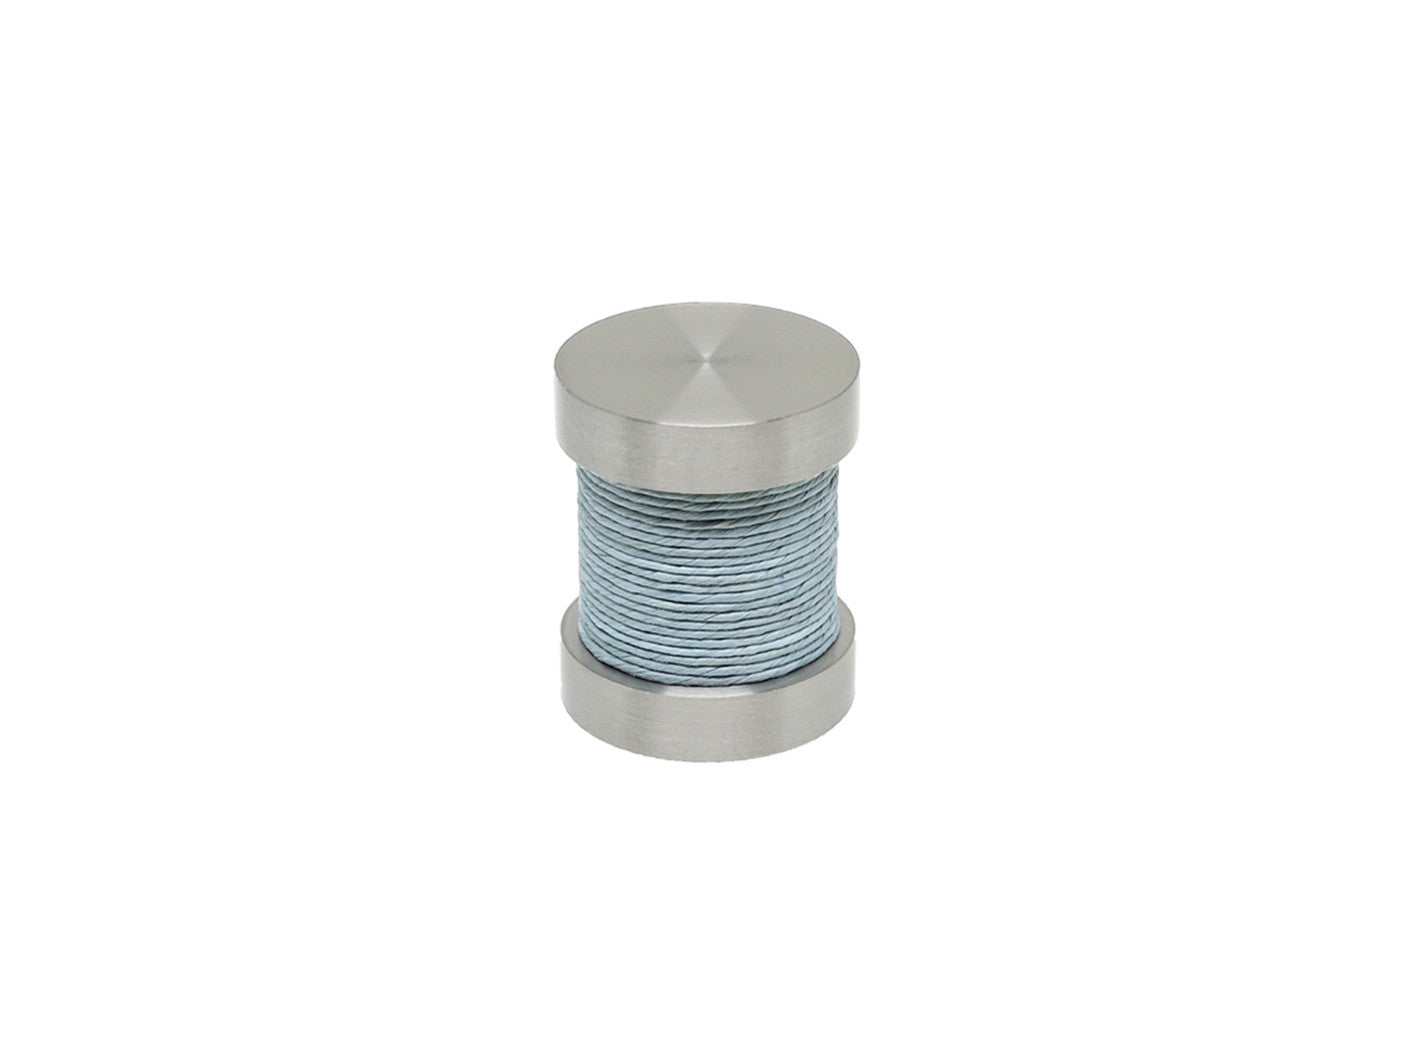 Mist blue coloured twine groove finial | Walcot House 30mm stainless steel collection